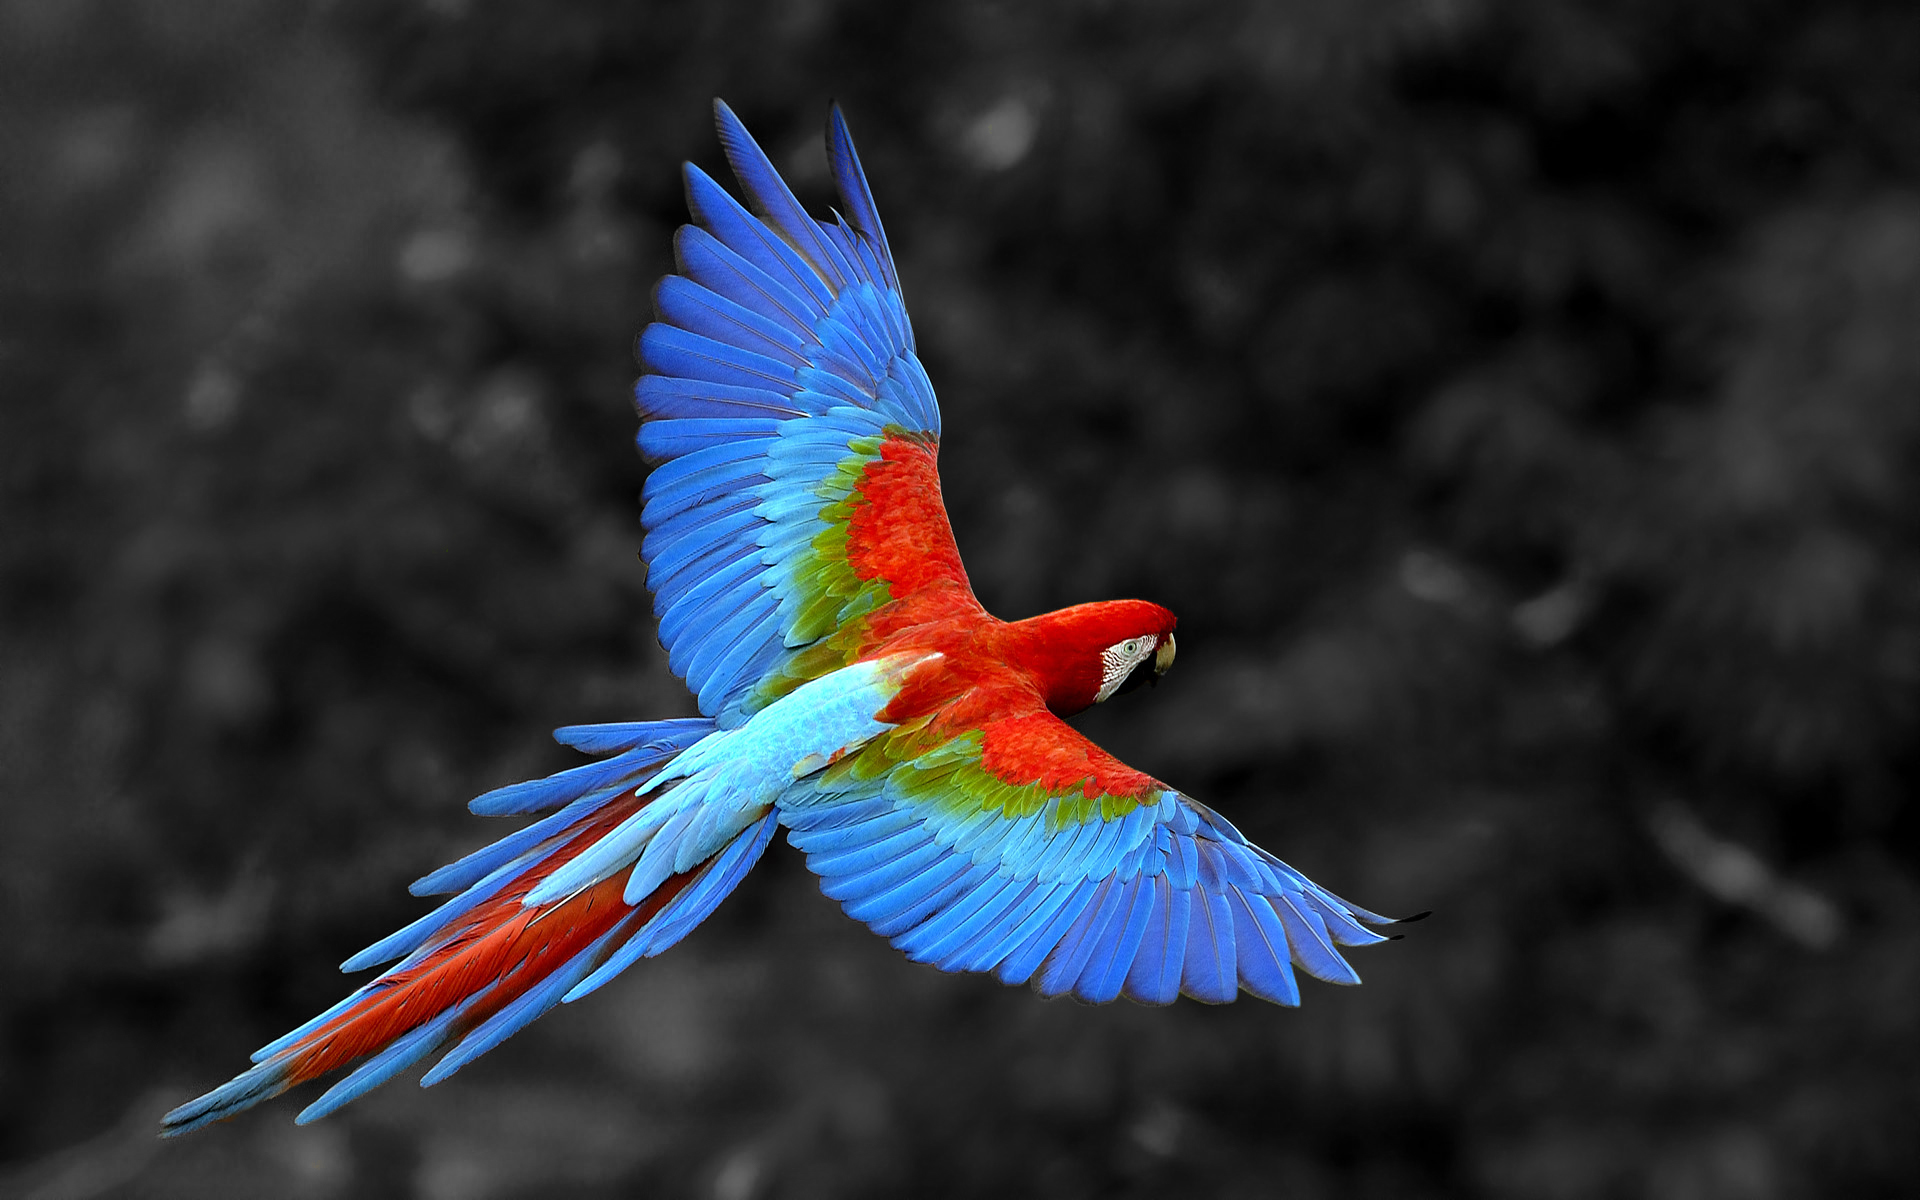 Birds Parrot Scarlet Macaw Amazonia 1920 x 1200 Download Close